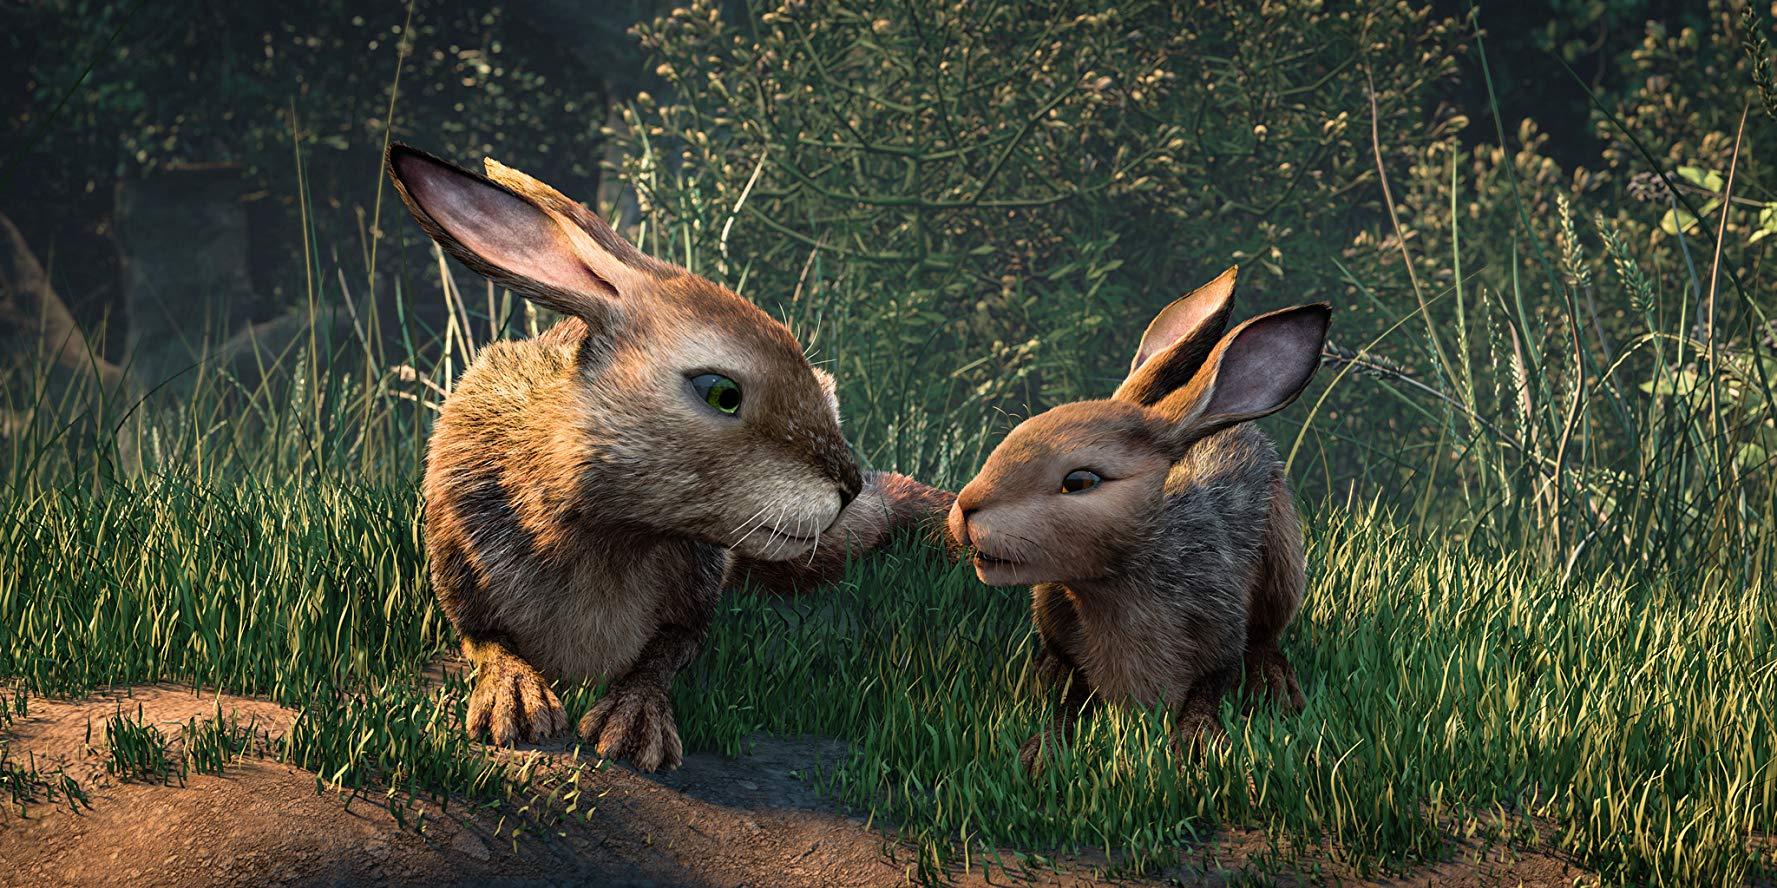 Watership Down: A New Take On A Childhood Favorite